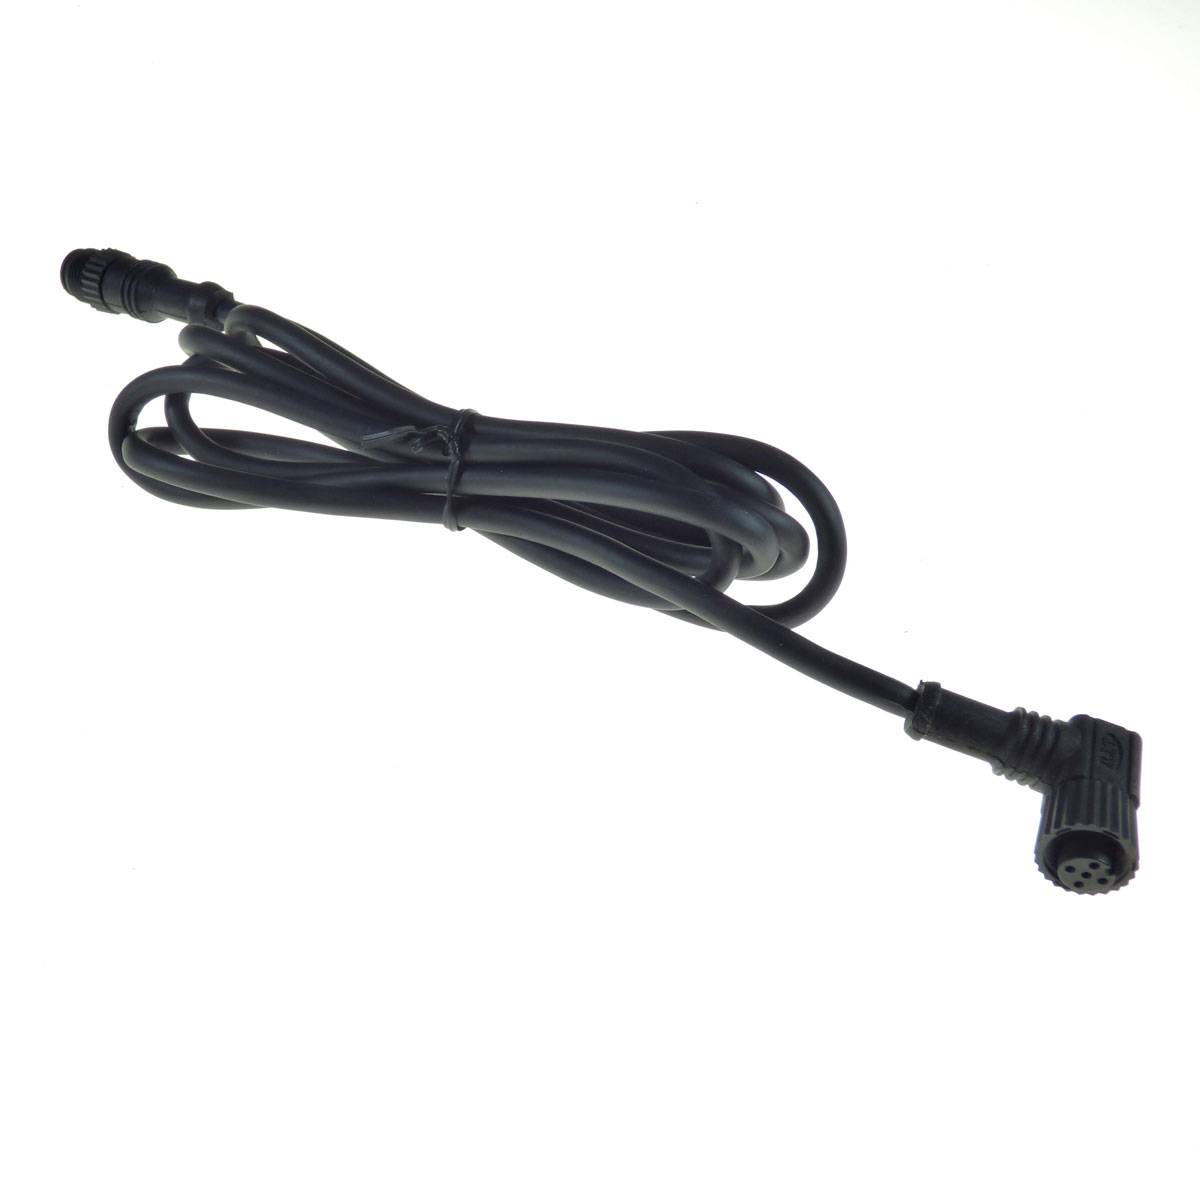 1.5m Torqeedo Motor Extension Cable